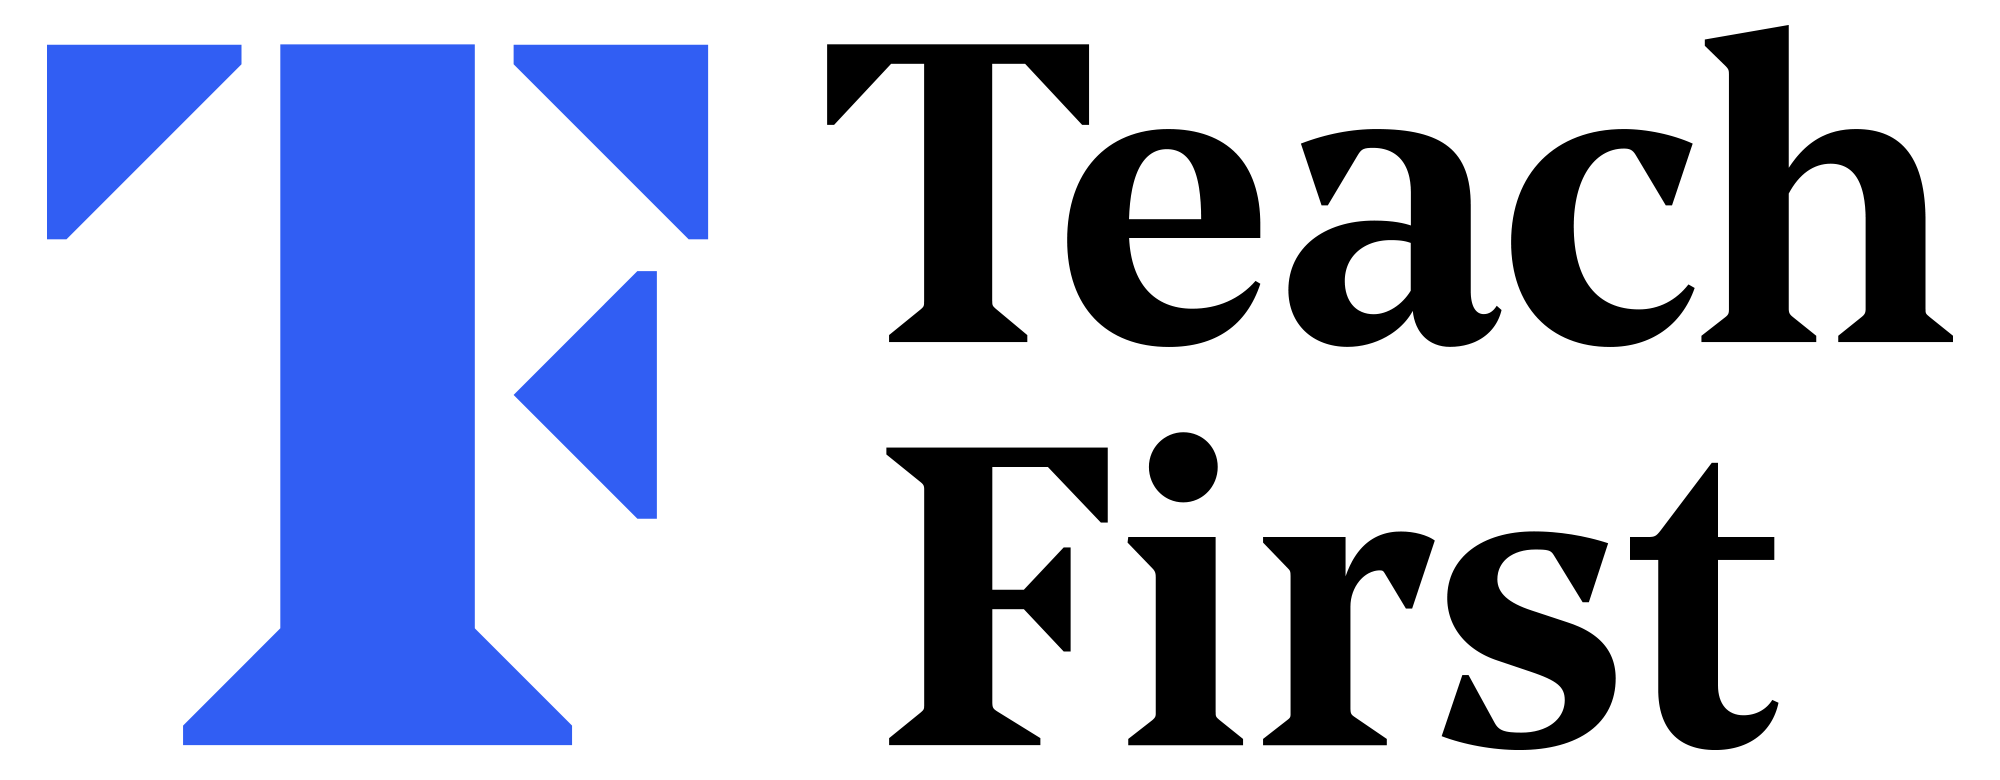 New Logo and Identity for Teach First by Johnson Banks